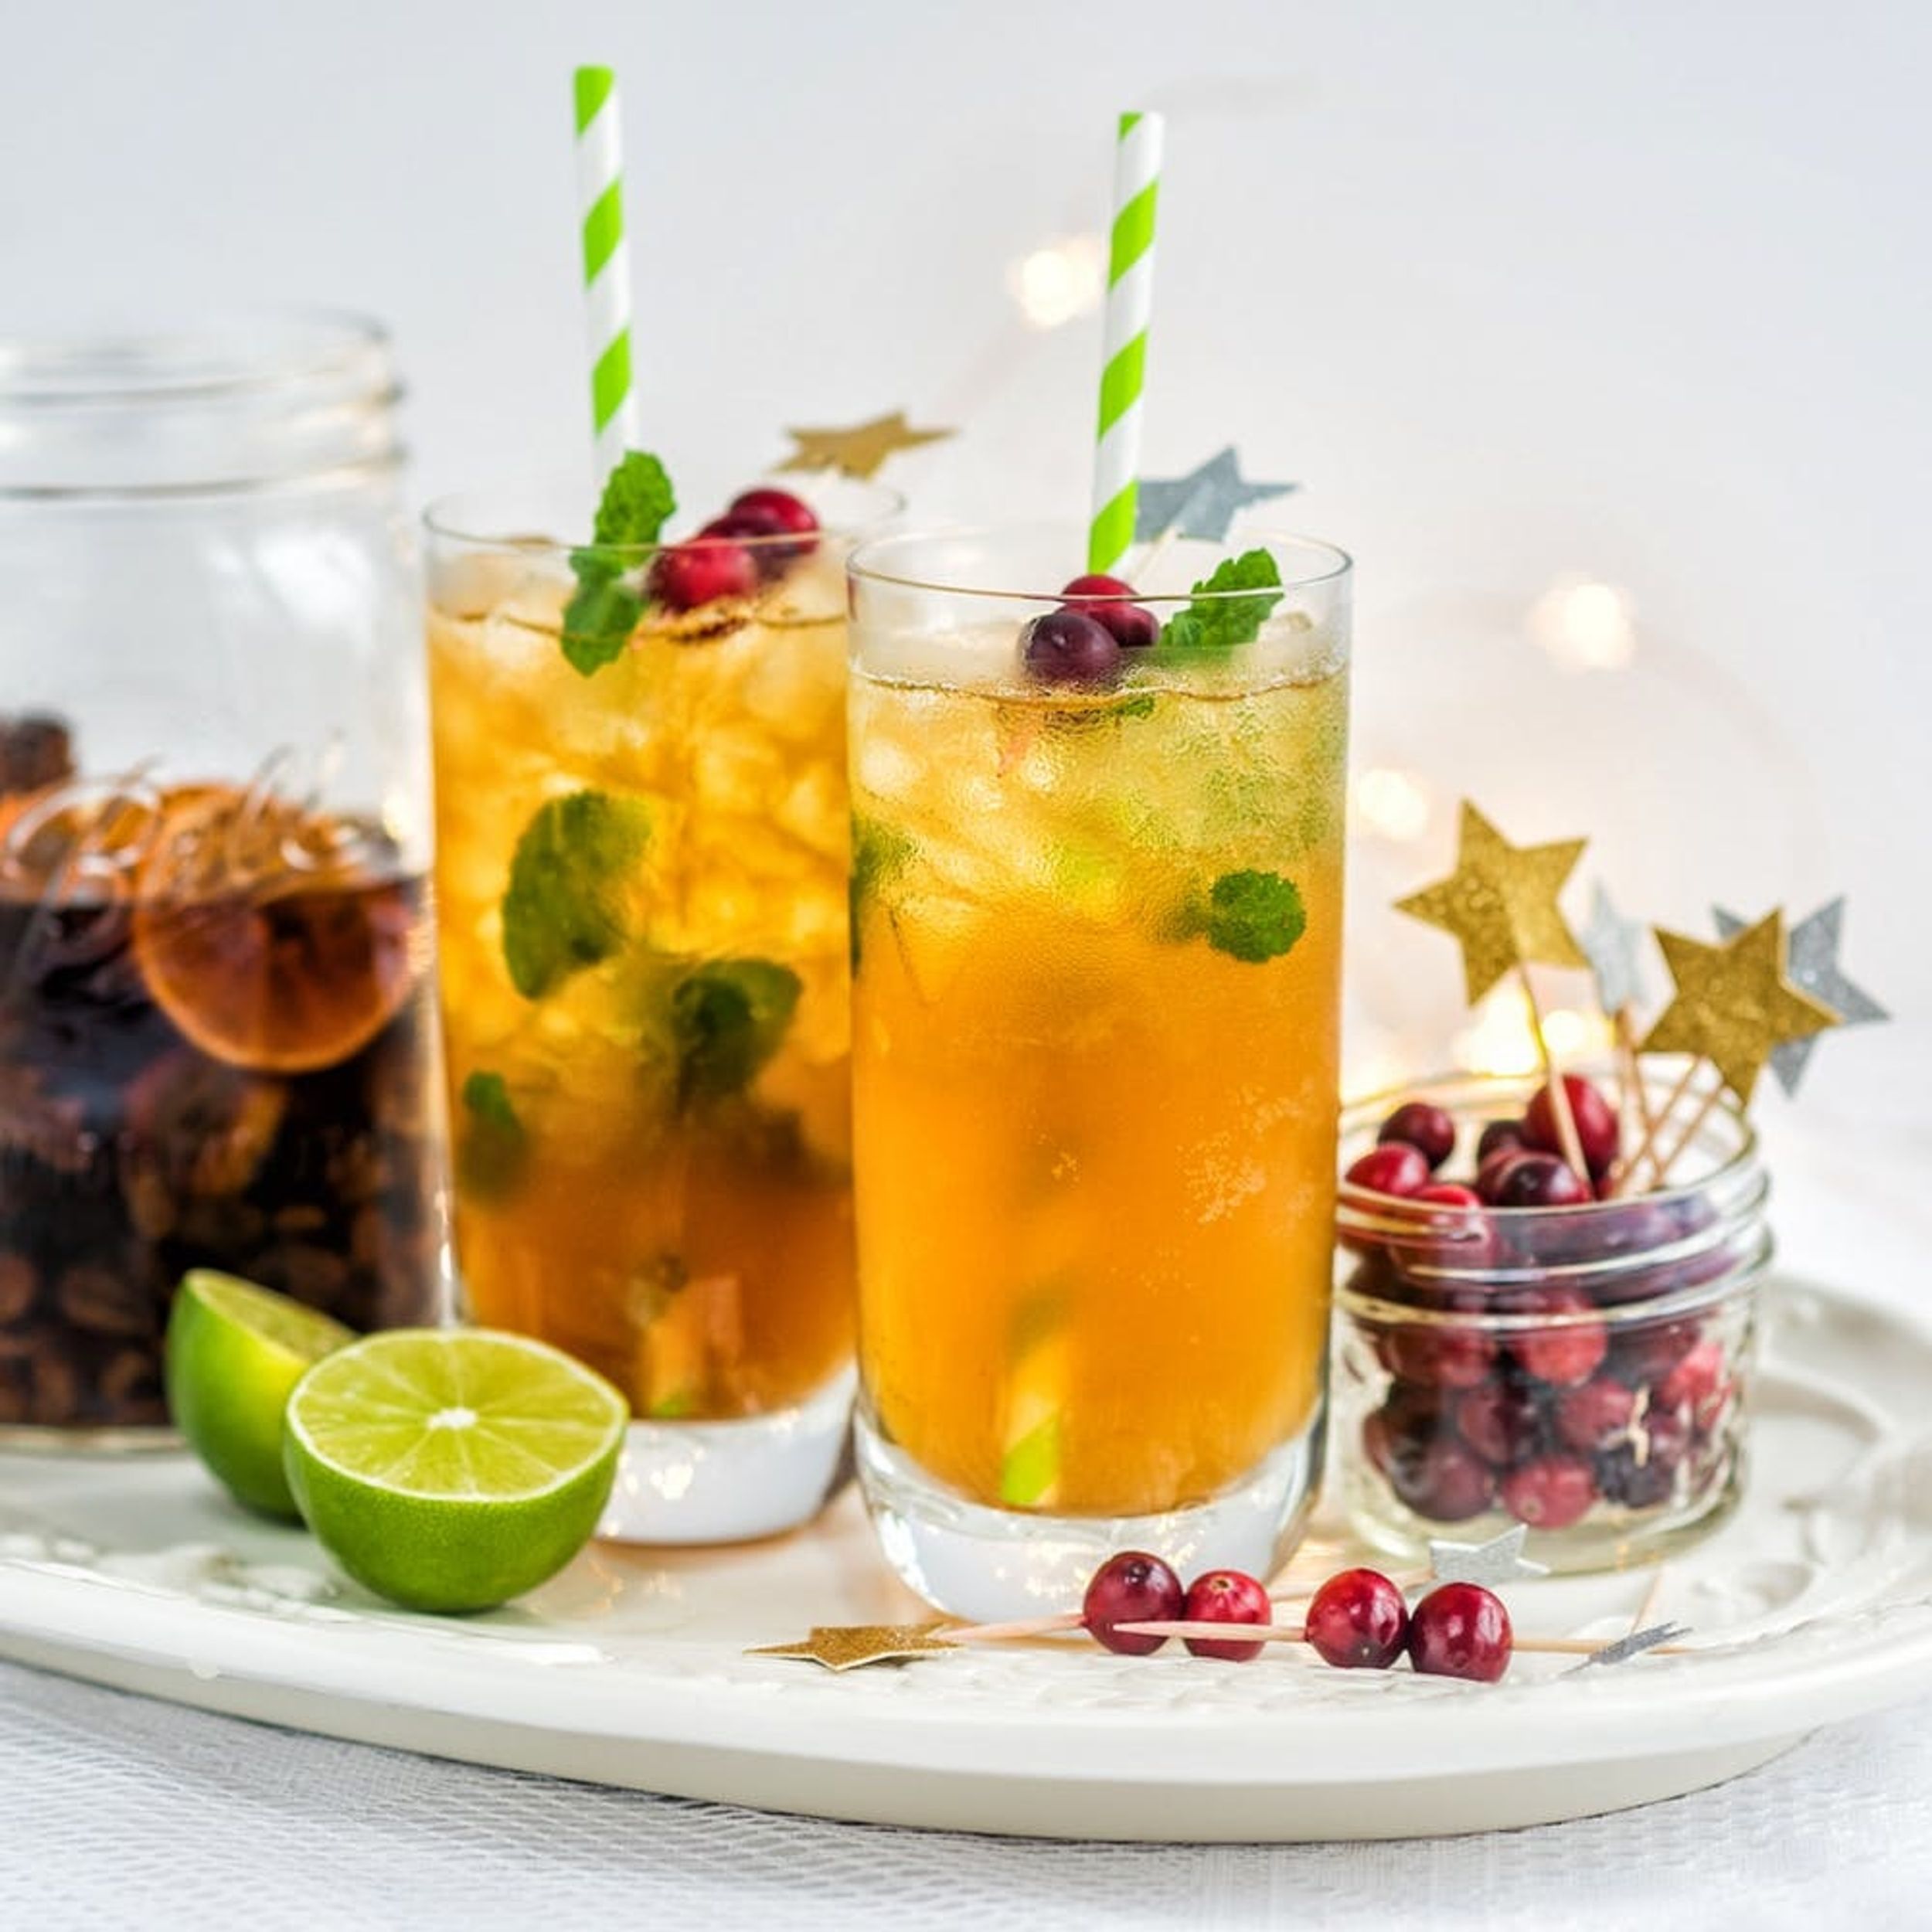 This Spiced Winter Mojito Needs to Become Your Signature Festive Cocktail!